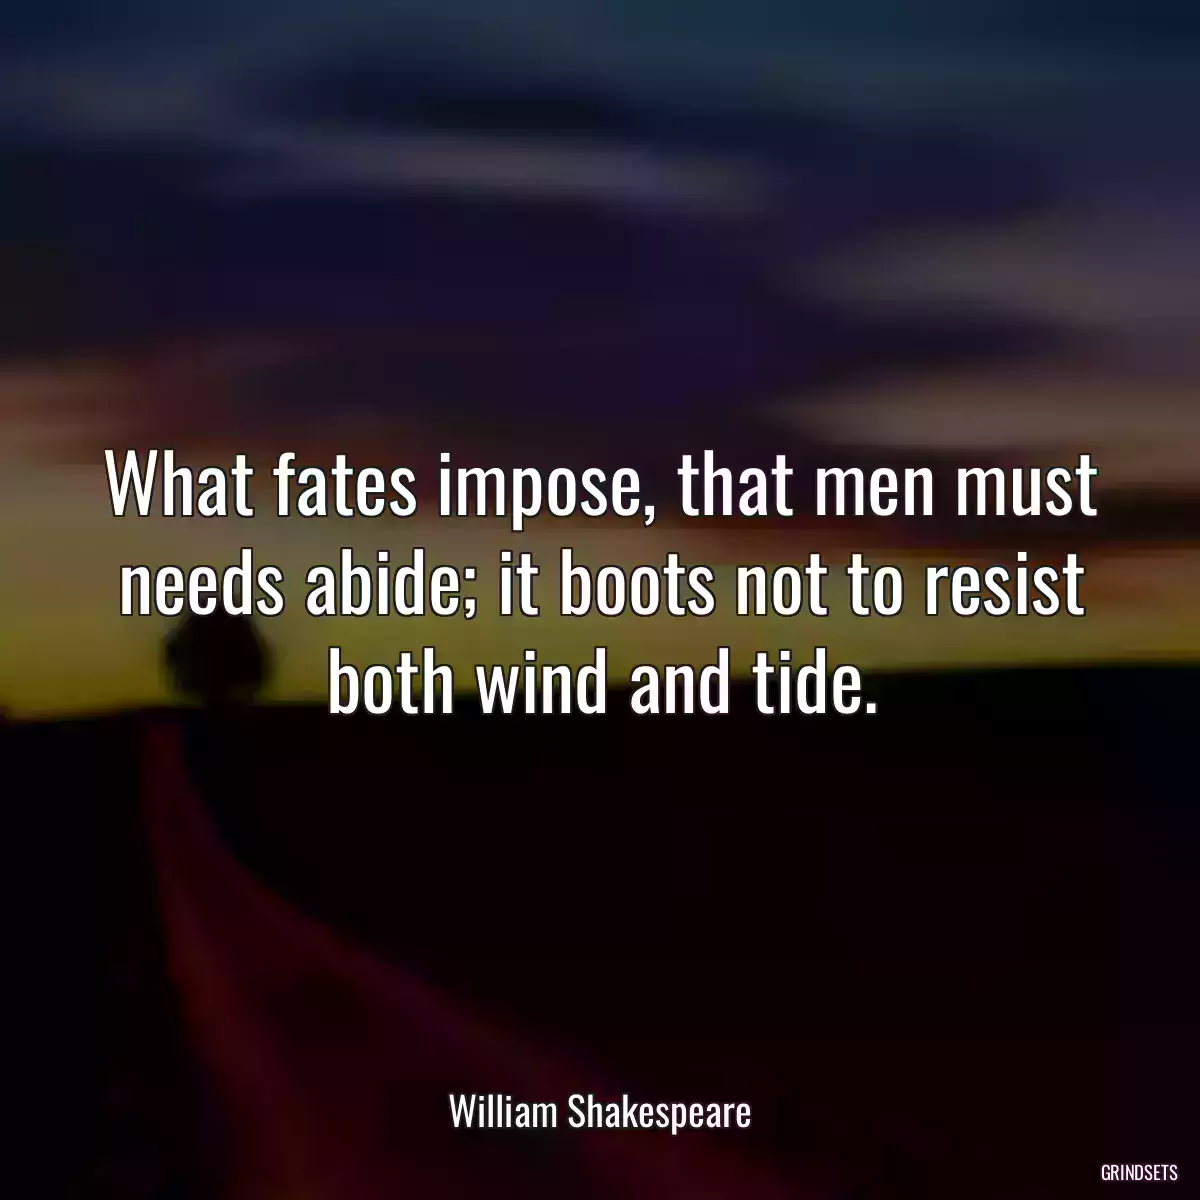 What fates impose, that men must needs abide; it boots not to resist both wind and tide.